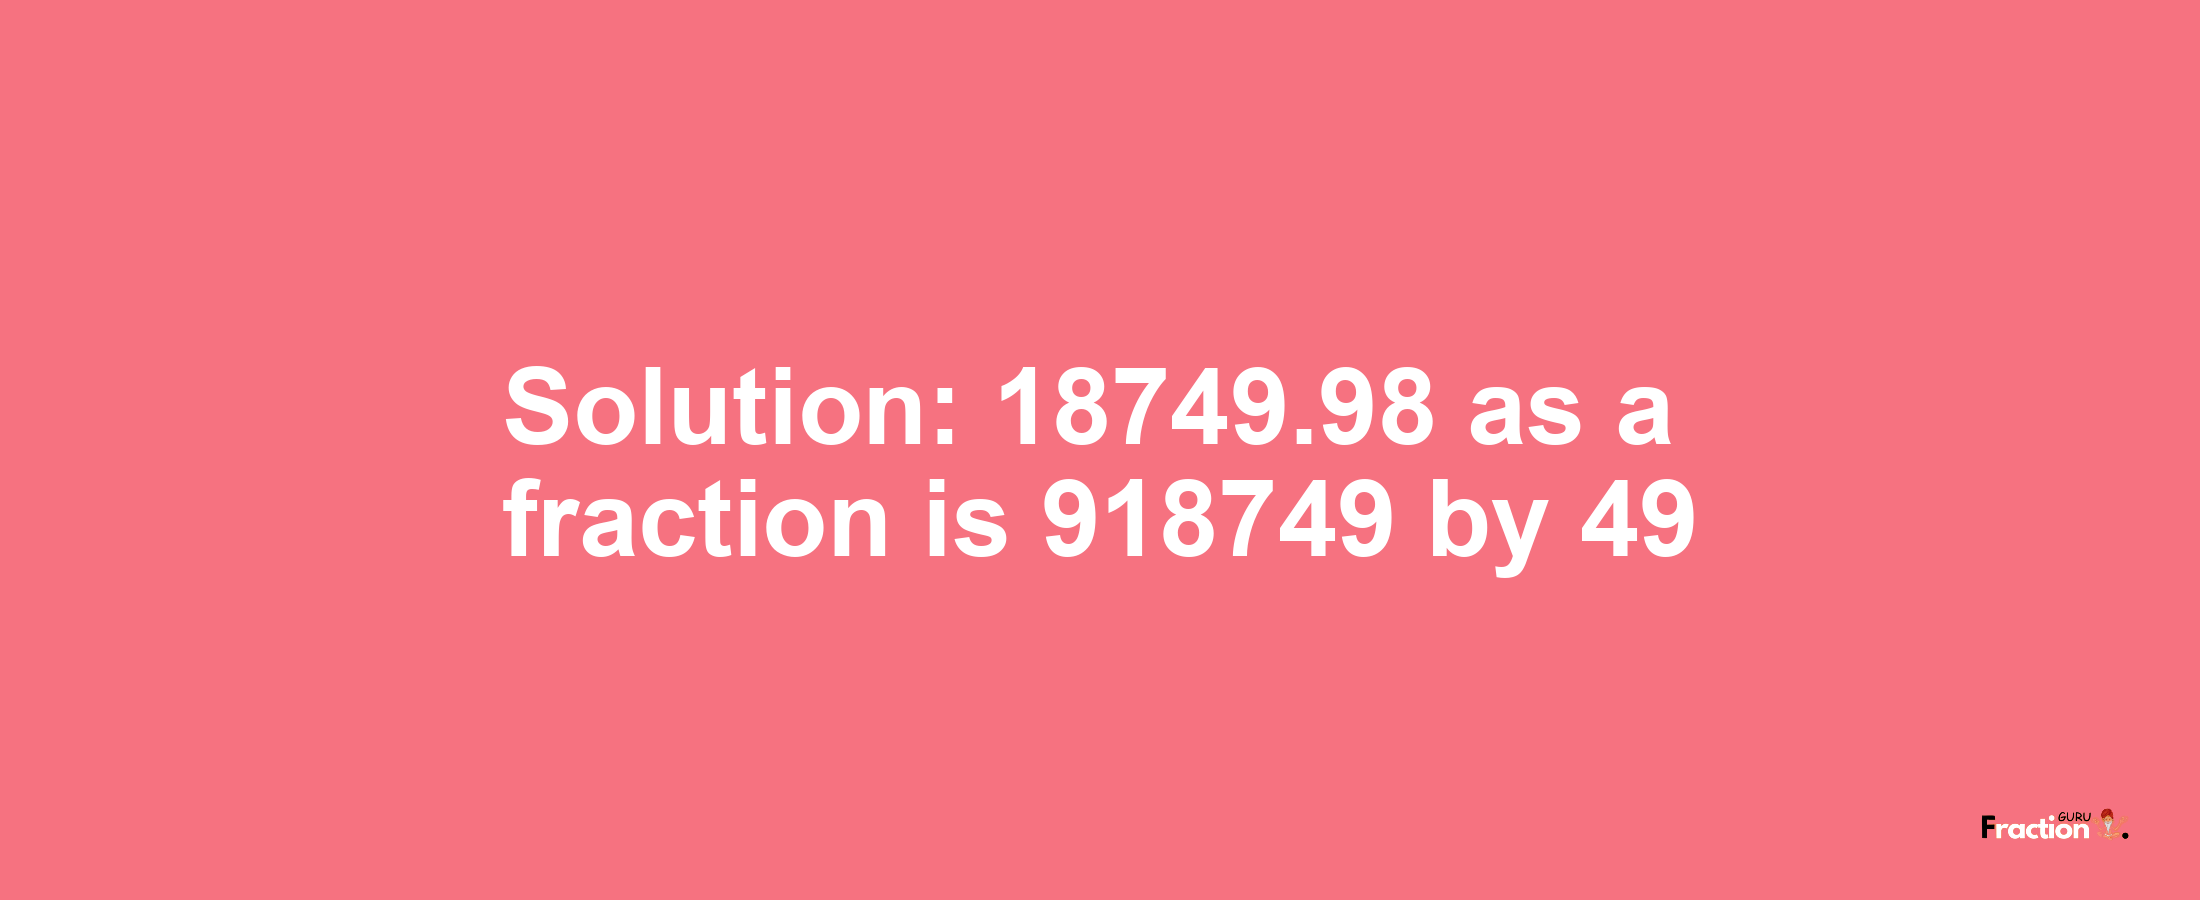 Solution:18749.98 as a fraction is 918749/49